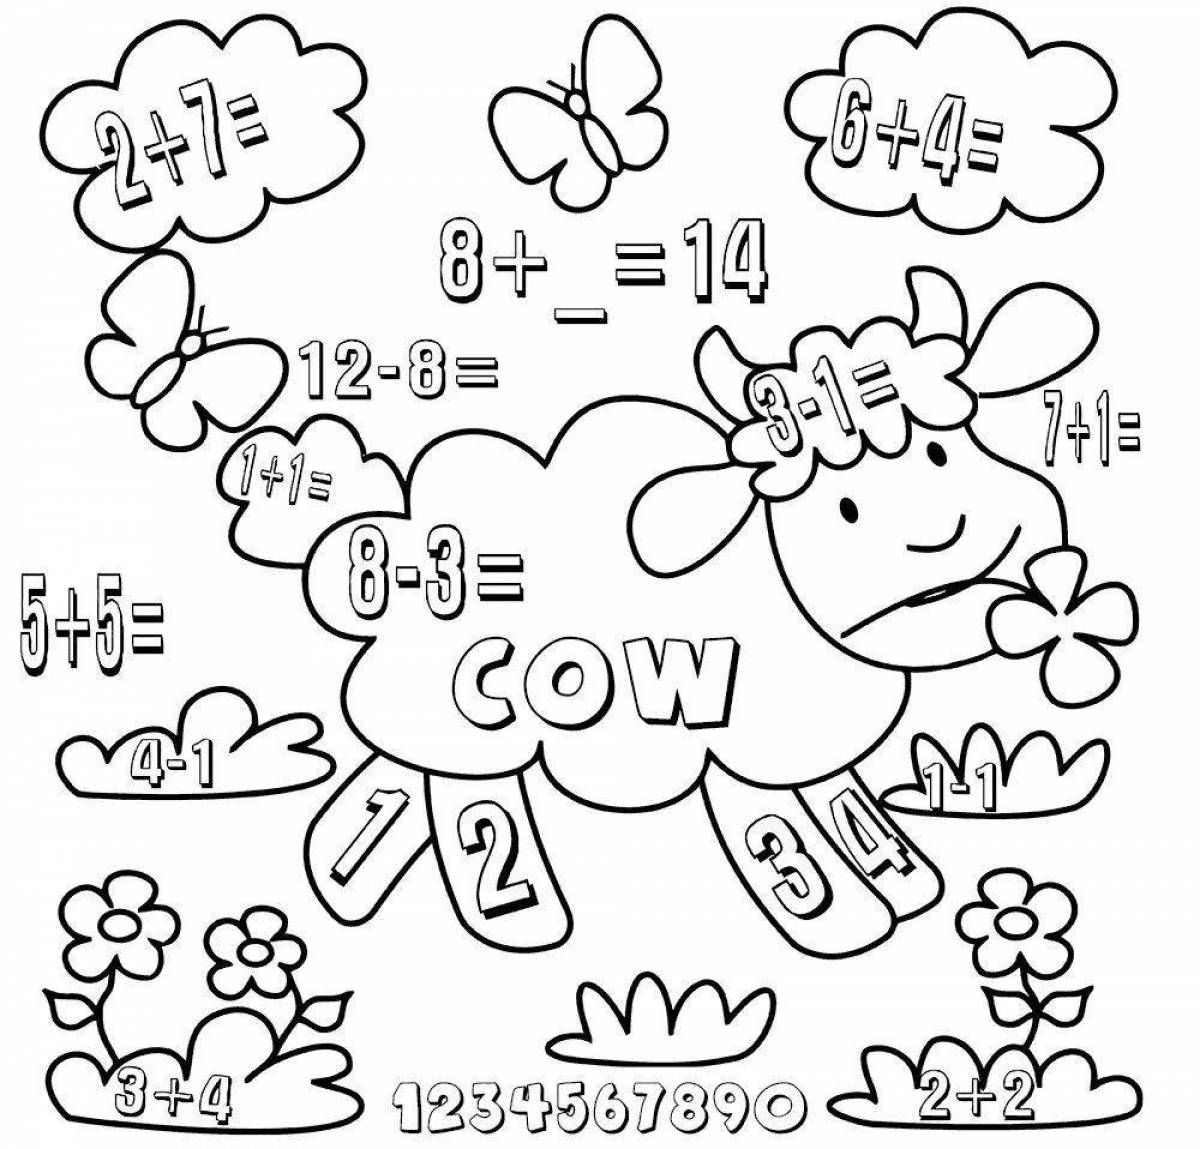 Color explosion coloring book for preschoolers in mathematics